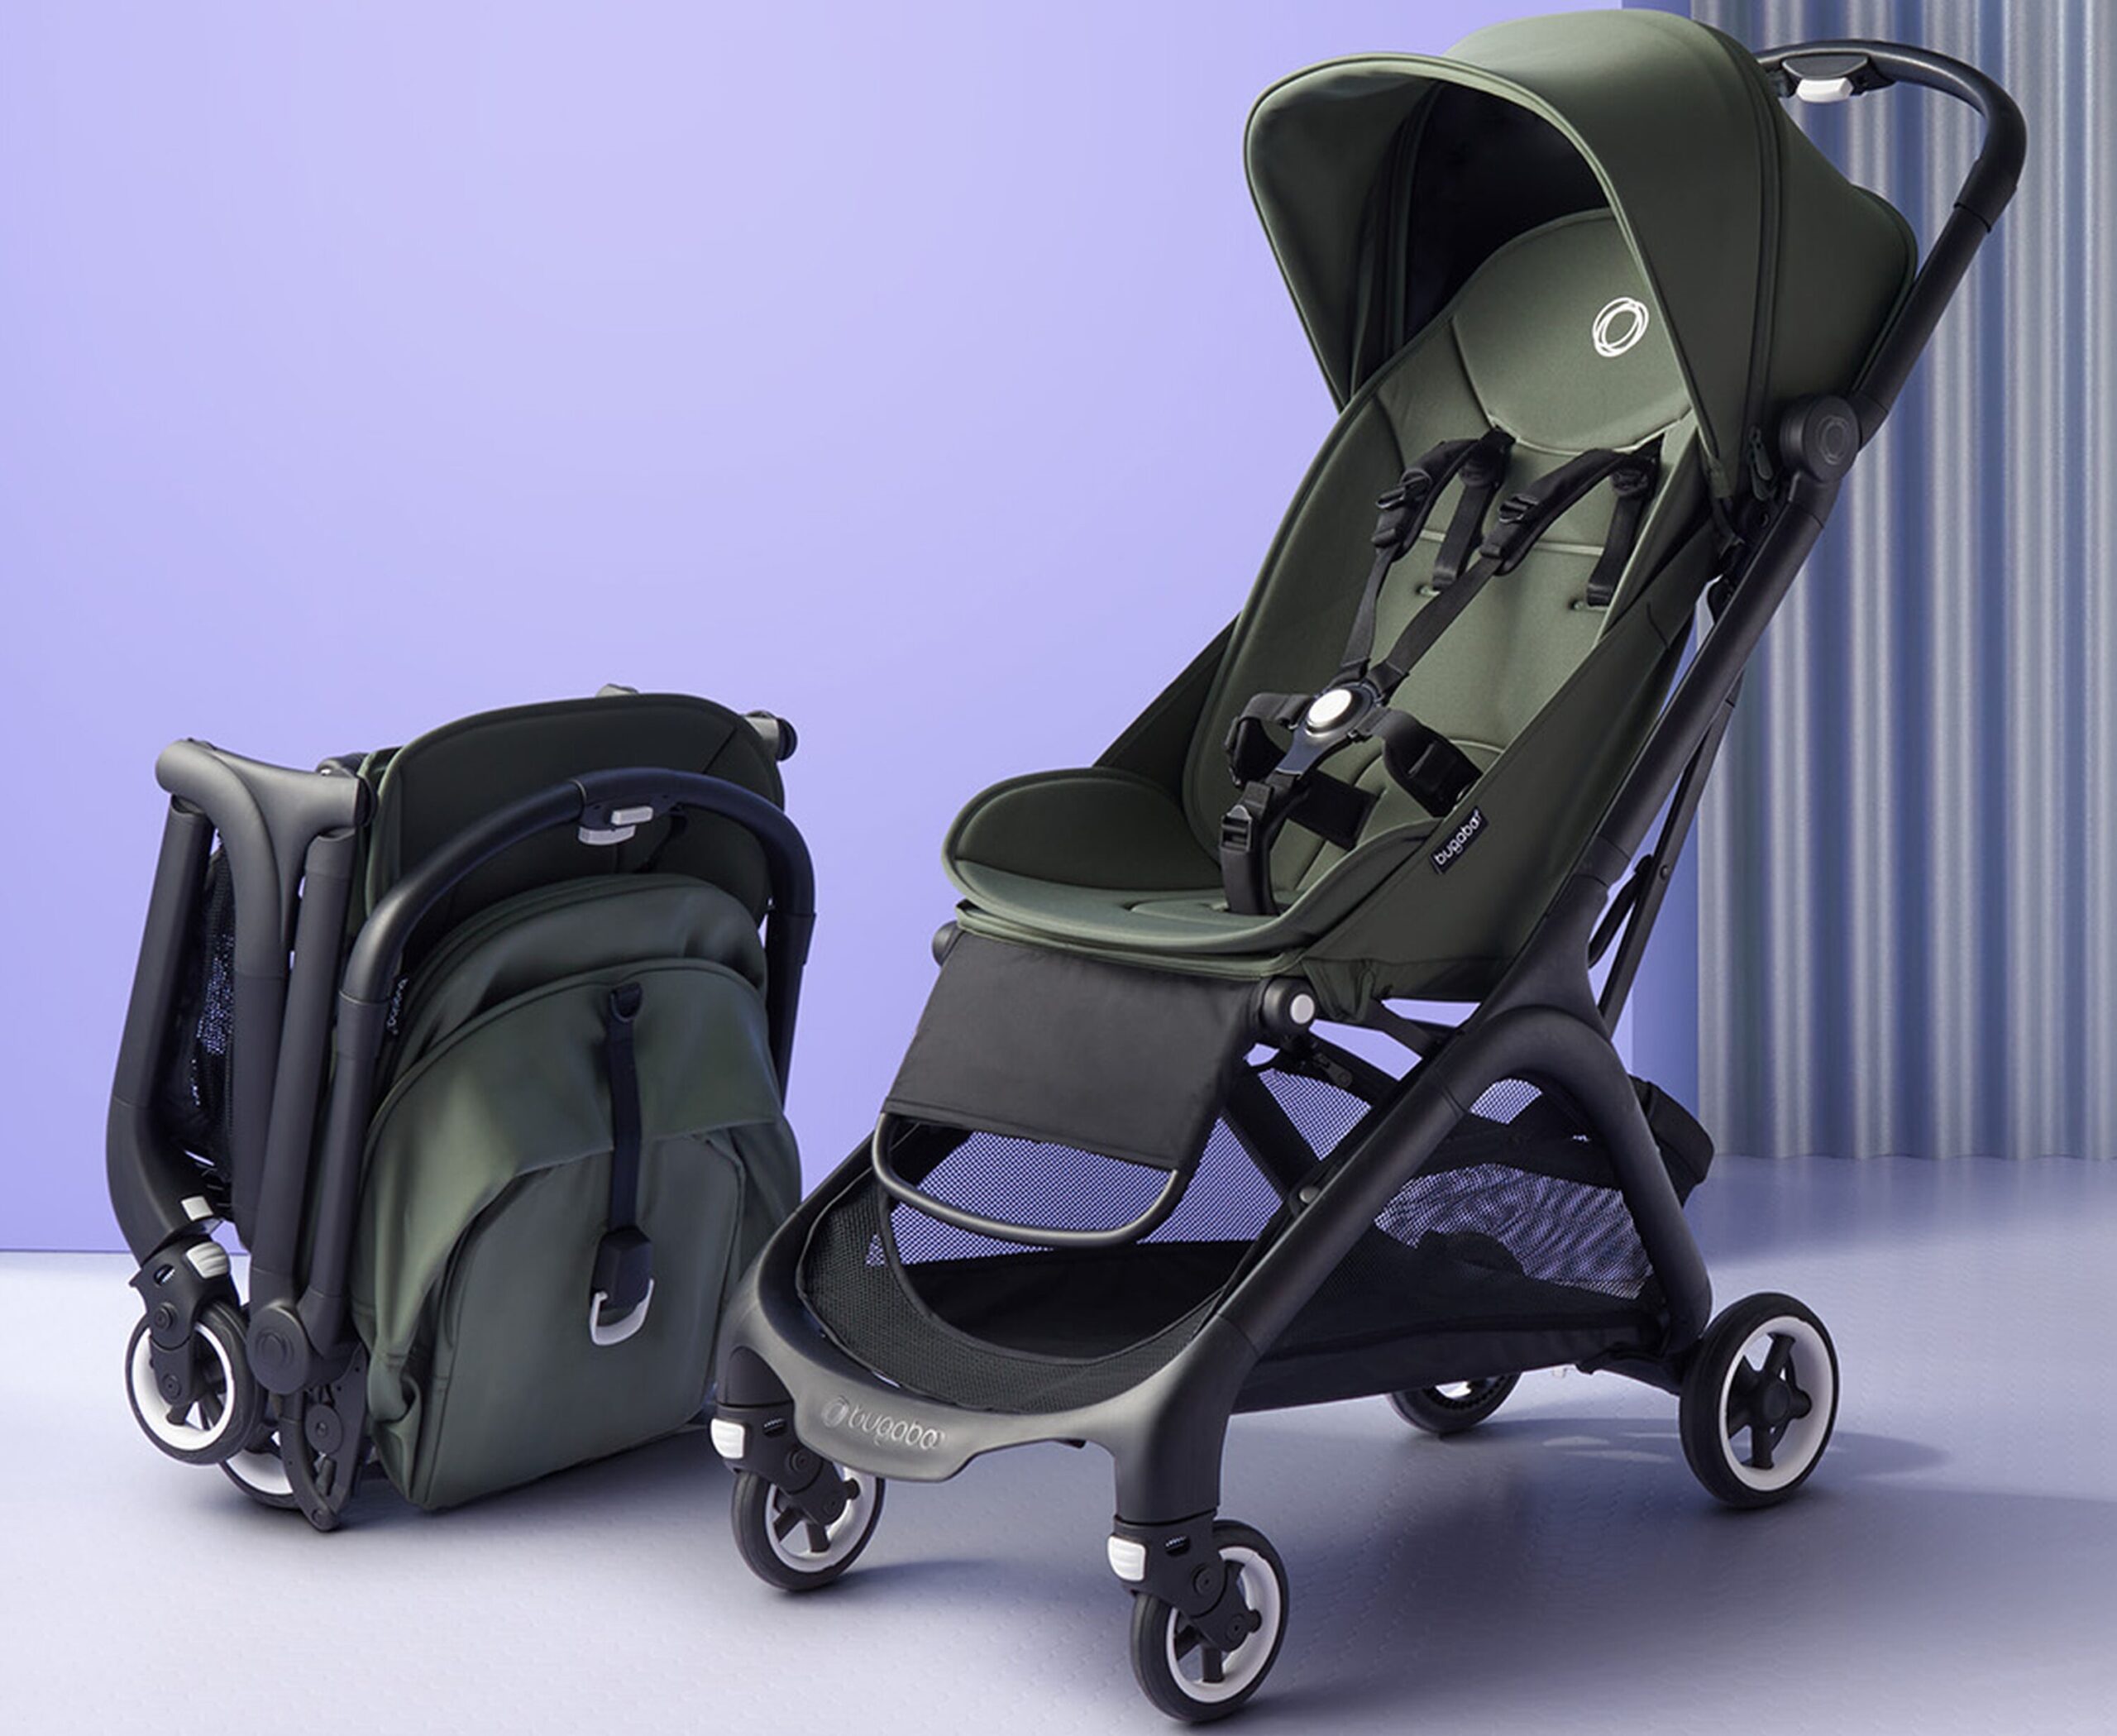 Bugaboo Butterfly Review: What Parents Need to Look For